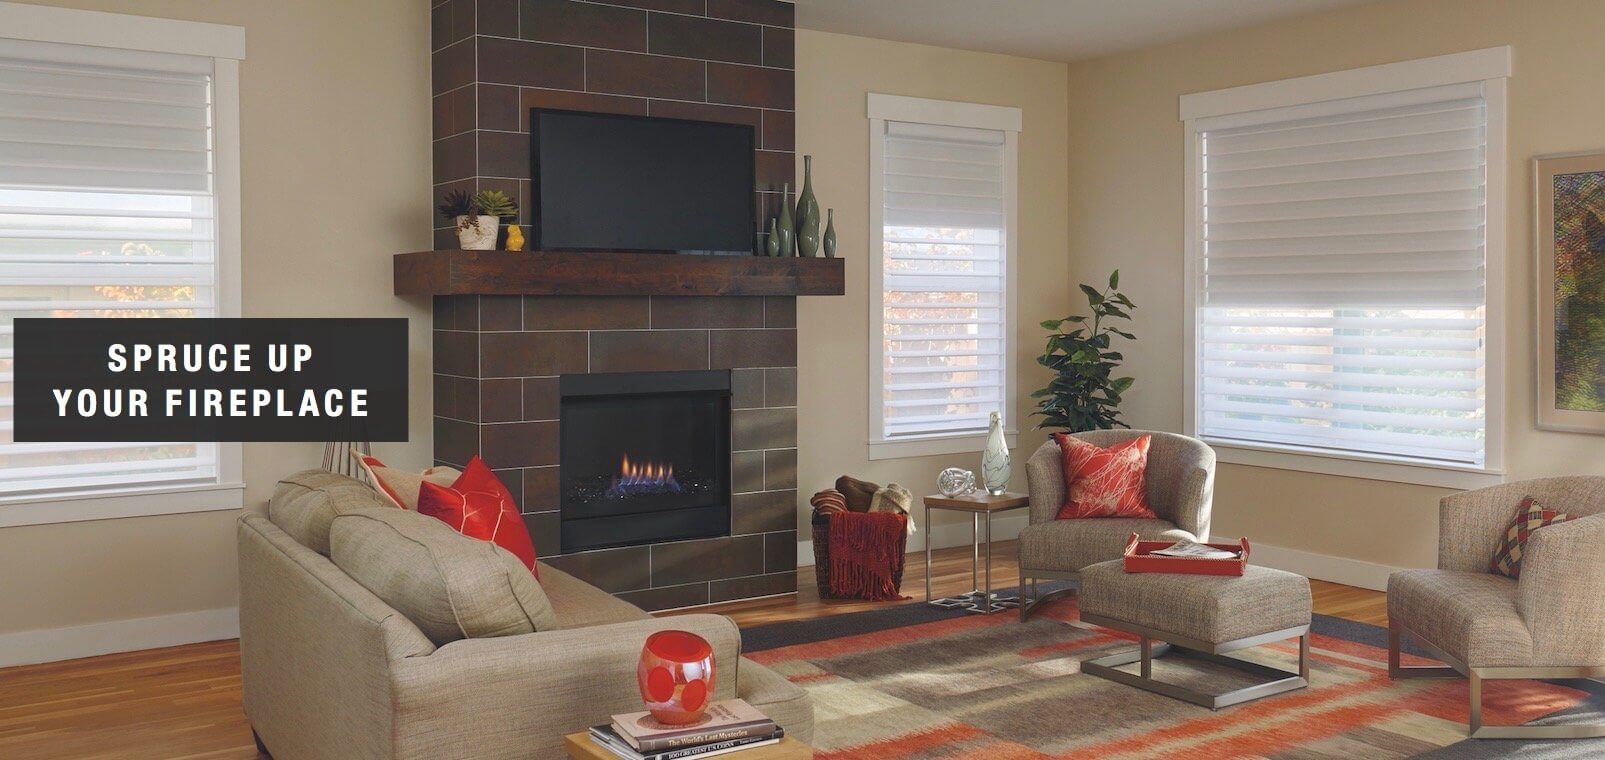 Adding multiple pillows to your couch looks best. Shown with Heritance® hardwood shutters.